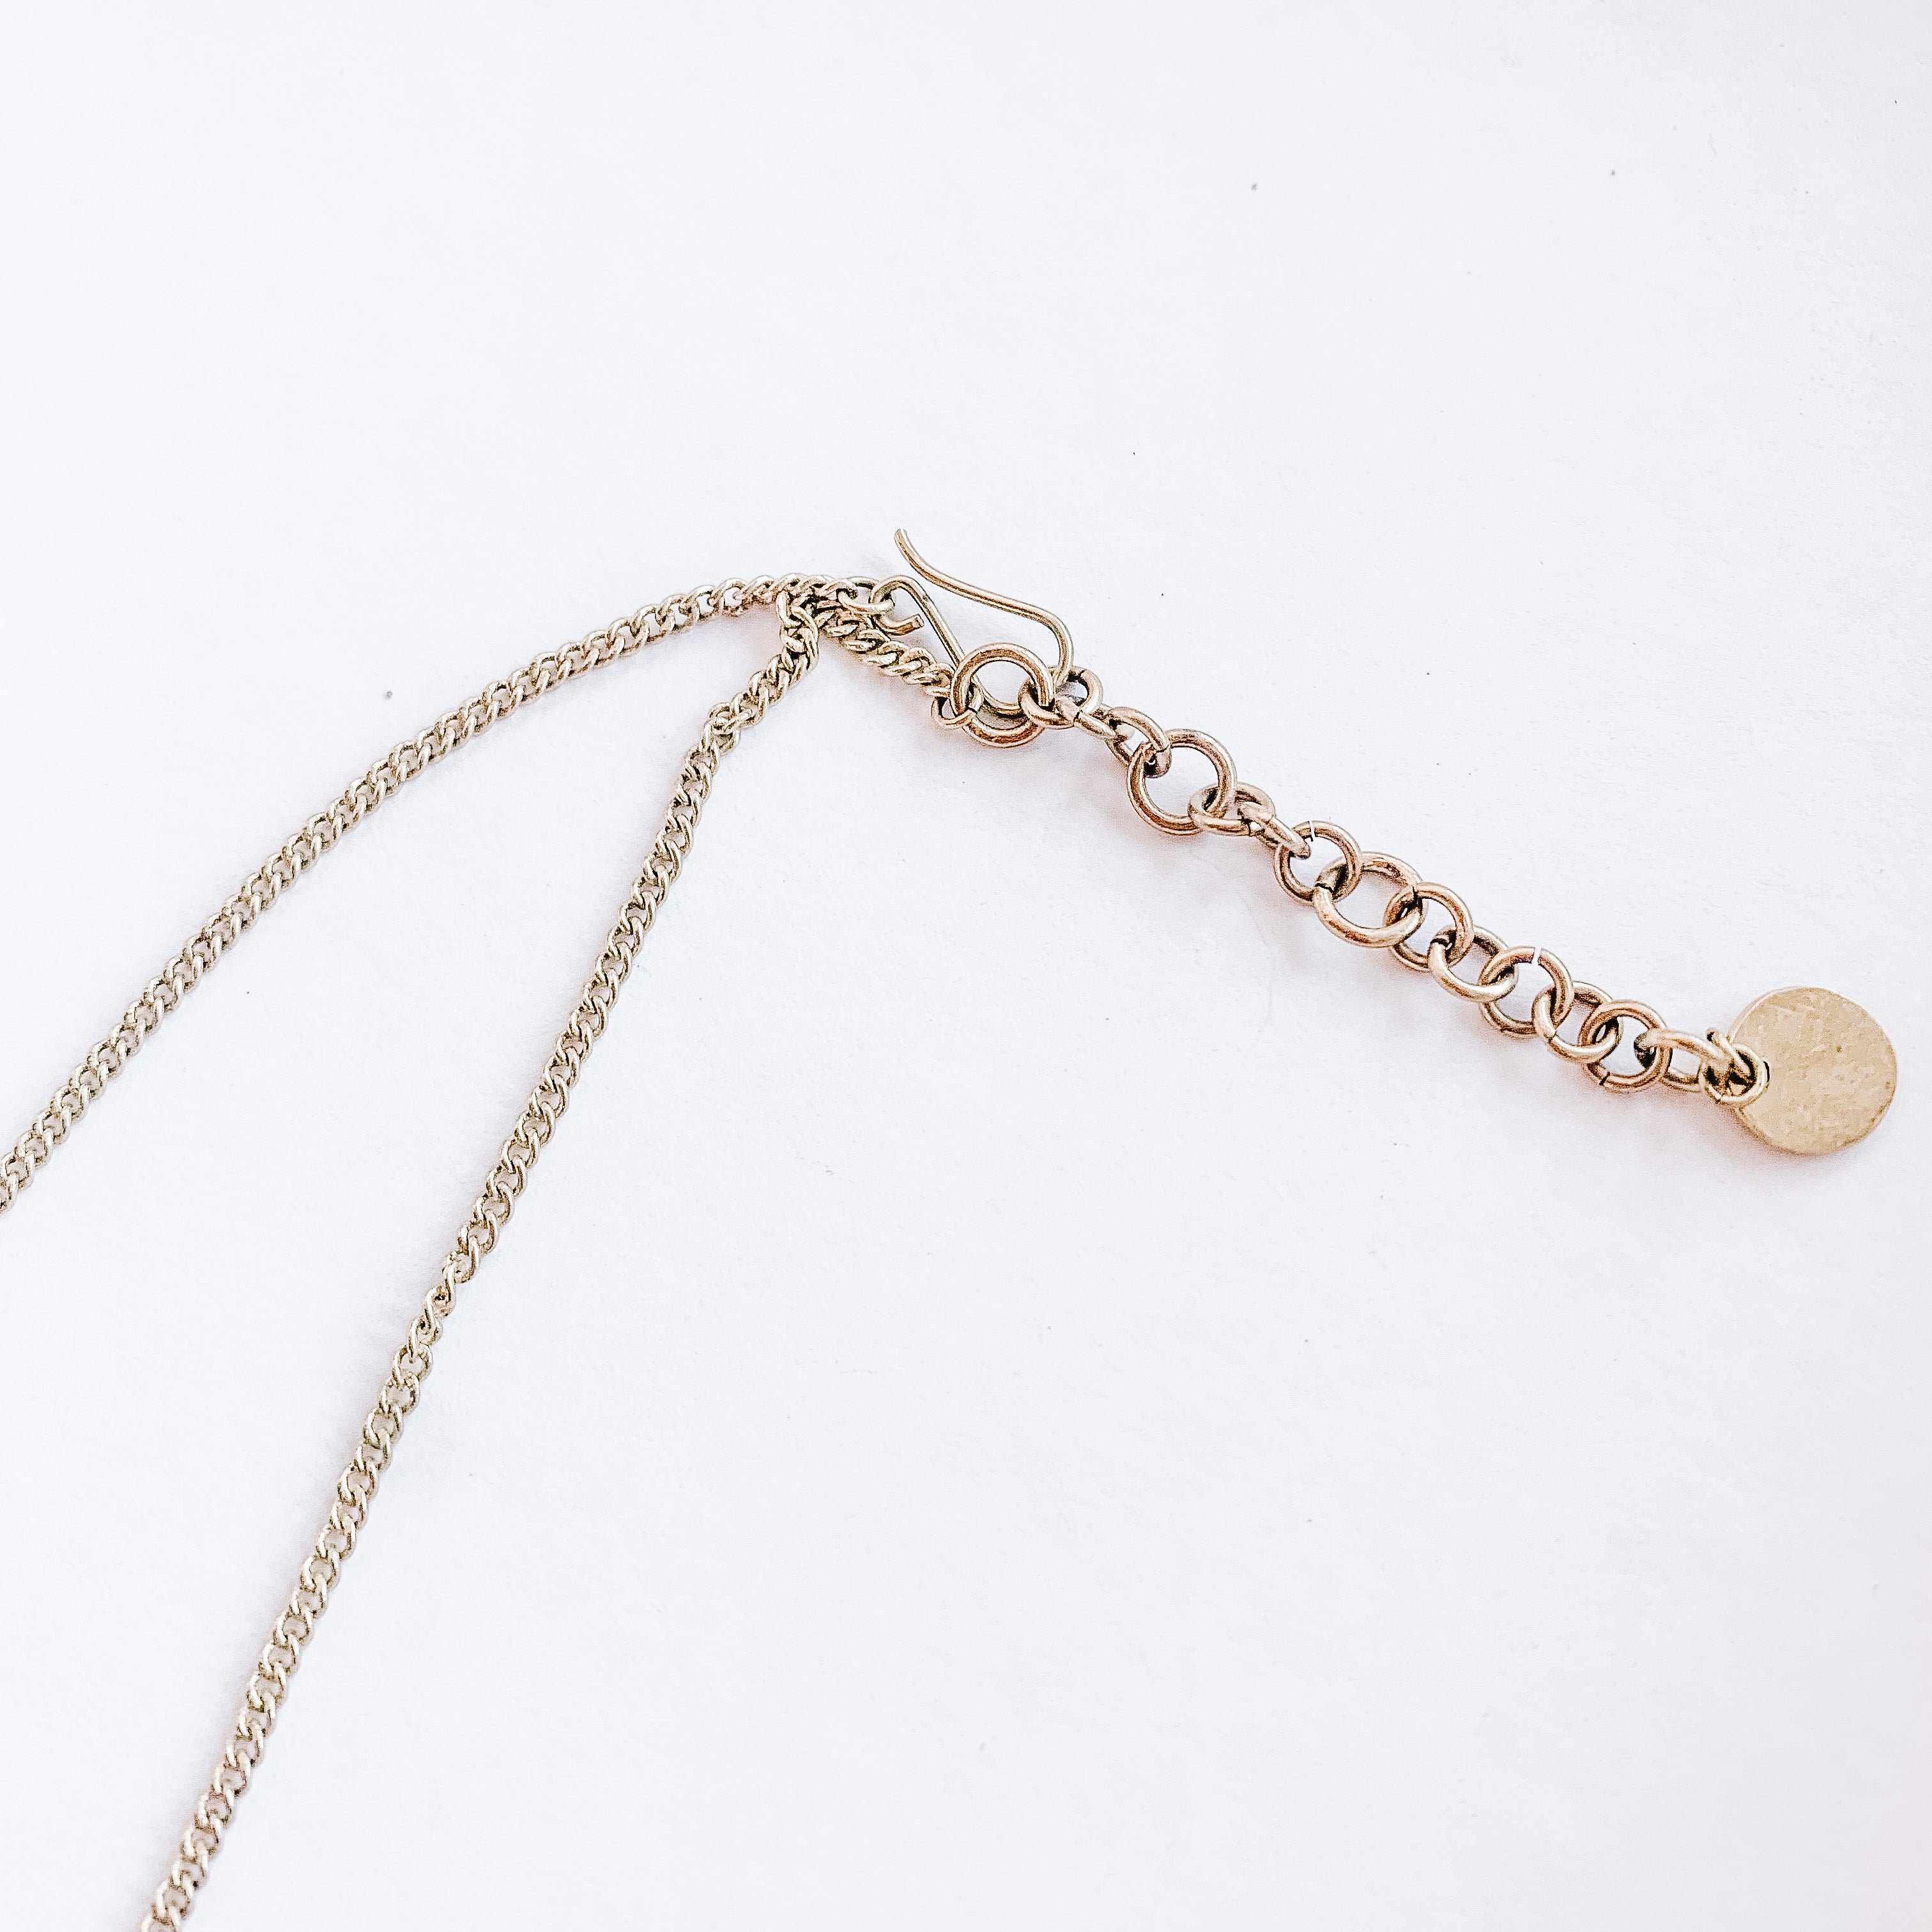 JustOne's brass necklace with small rectangle bars attached, handcrafted in Kenya